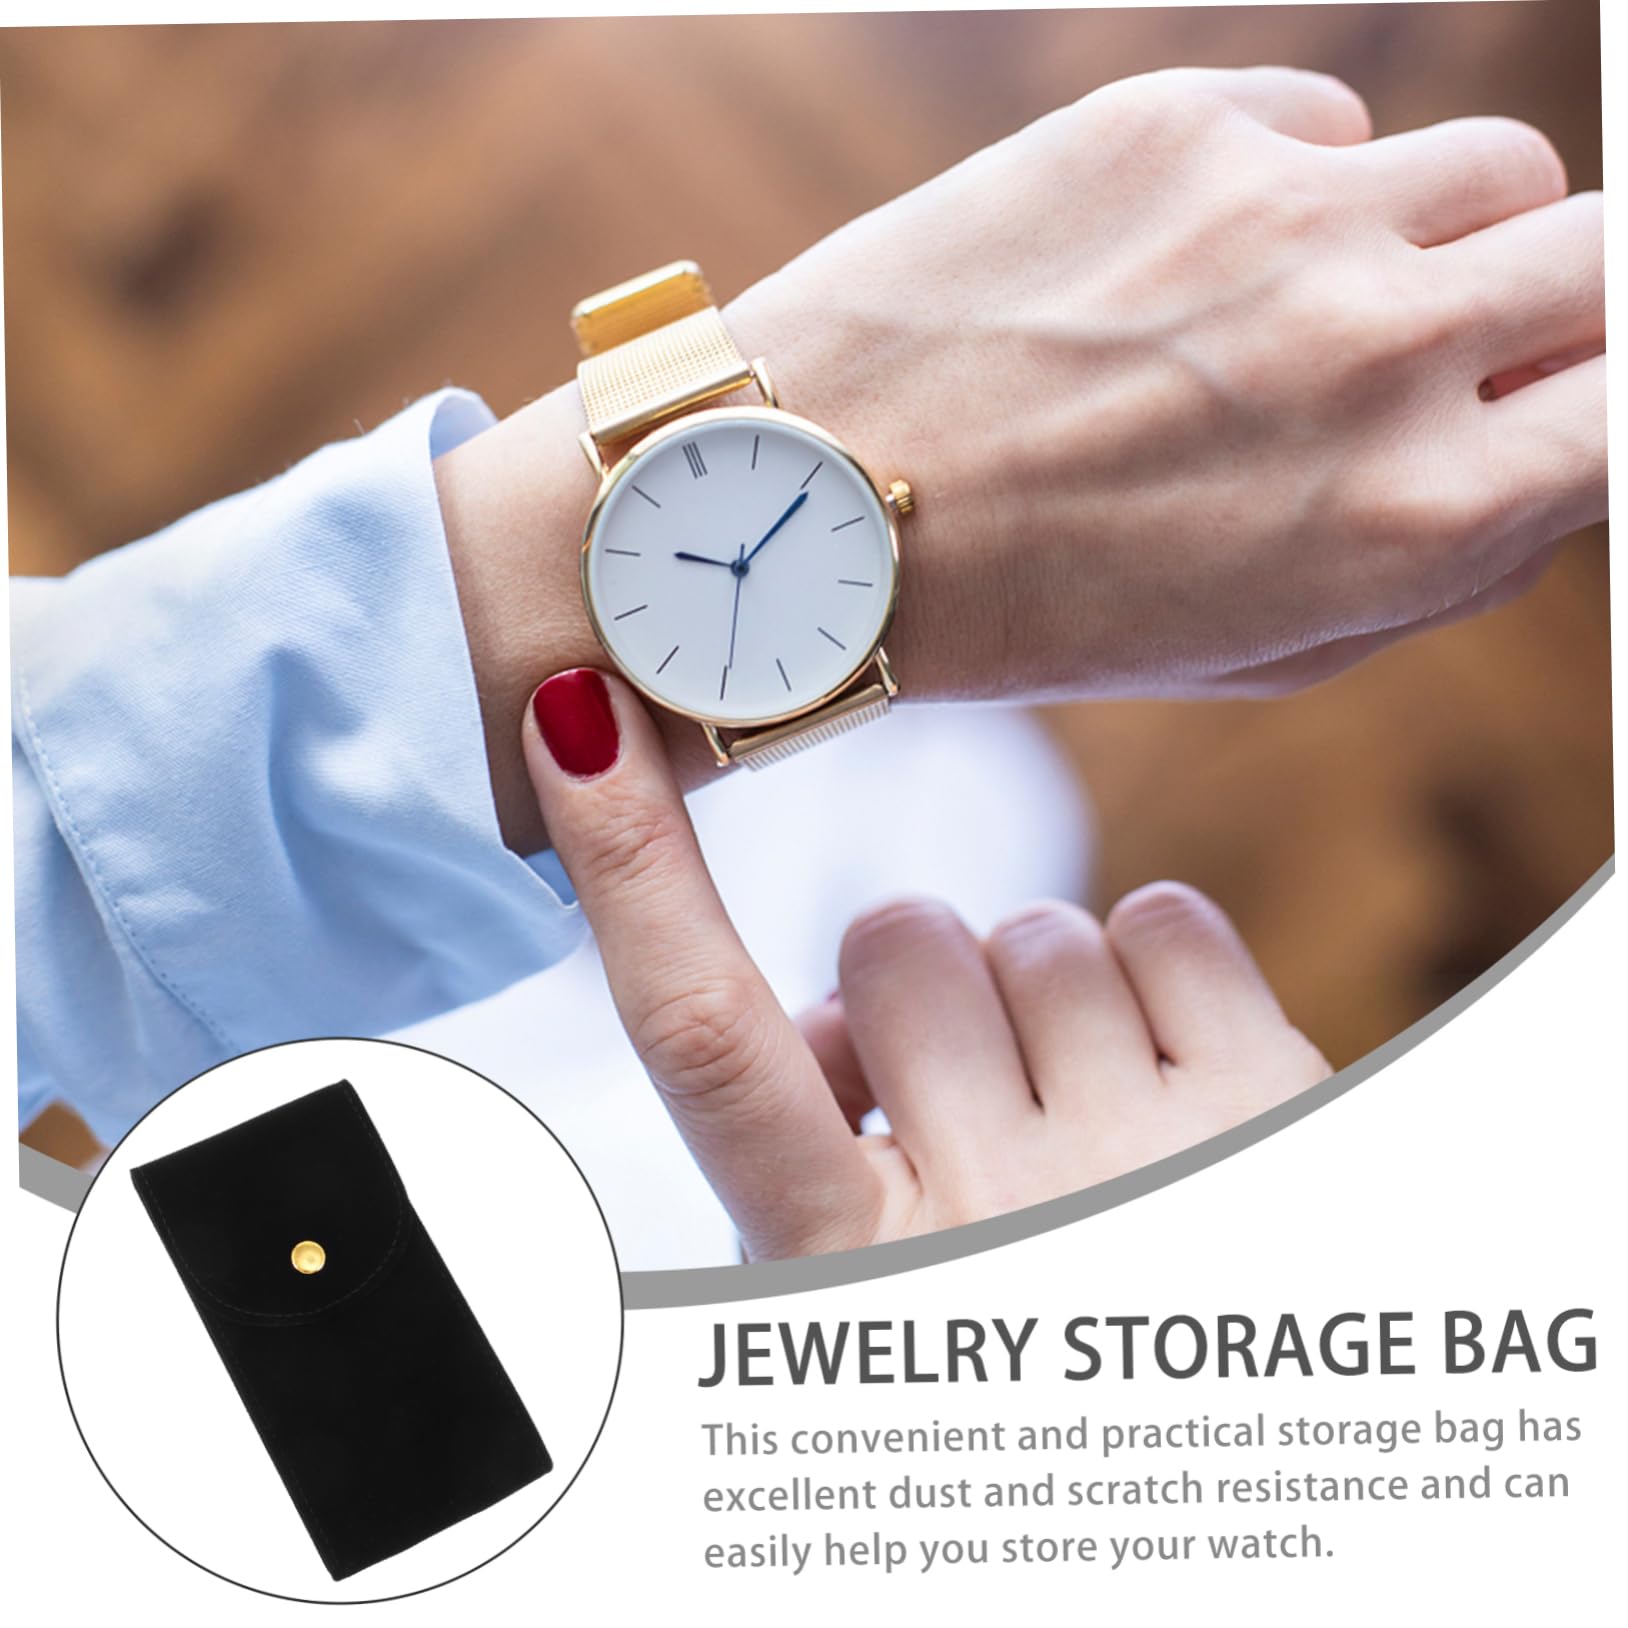 Holibanna Watch Storage Bag Travel Packing Bags Jewelry Pouch with Snap Watch Packing Snap Bag Packing Bags for Travel Gift Bags Black Watches Button Short Plush Protective Bag